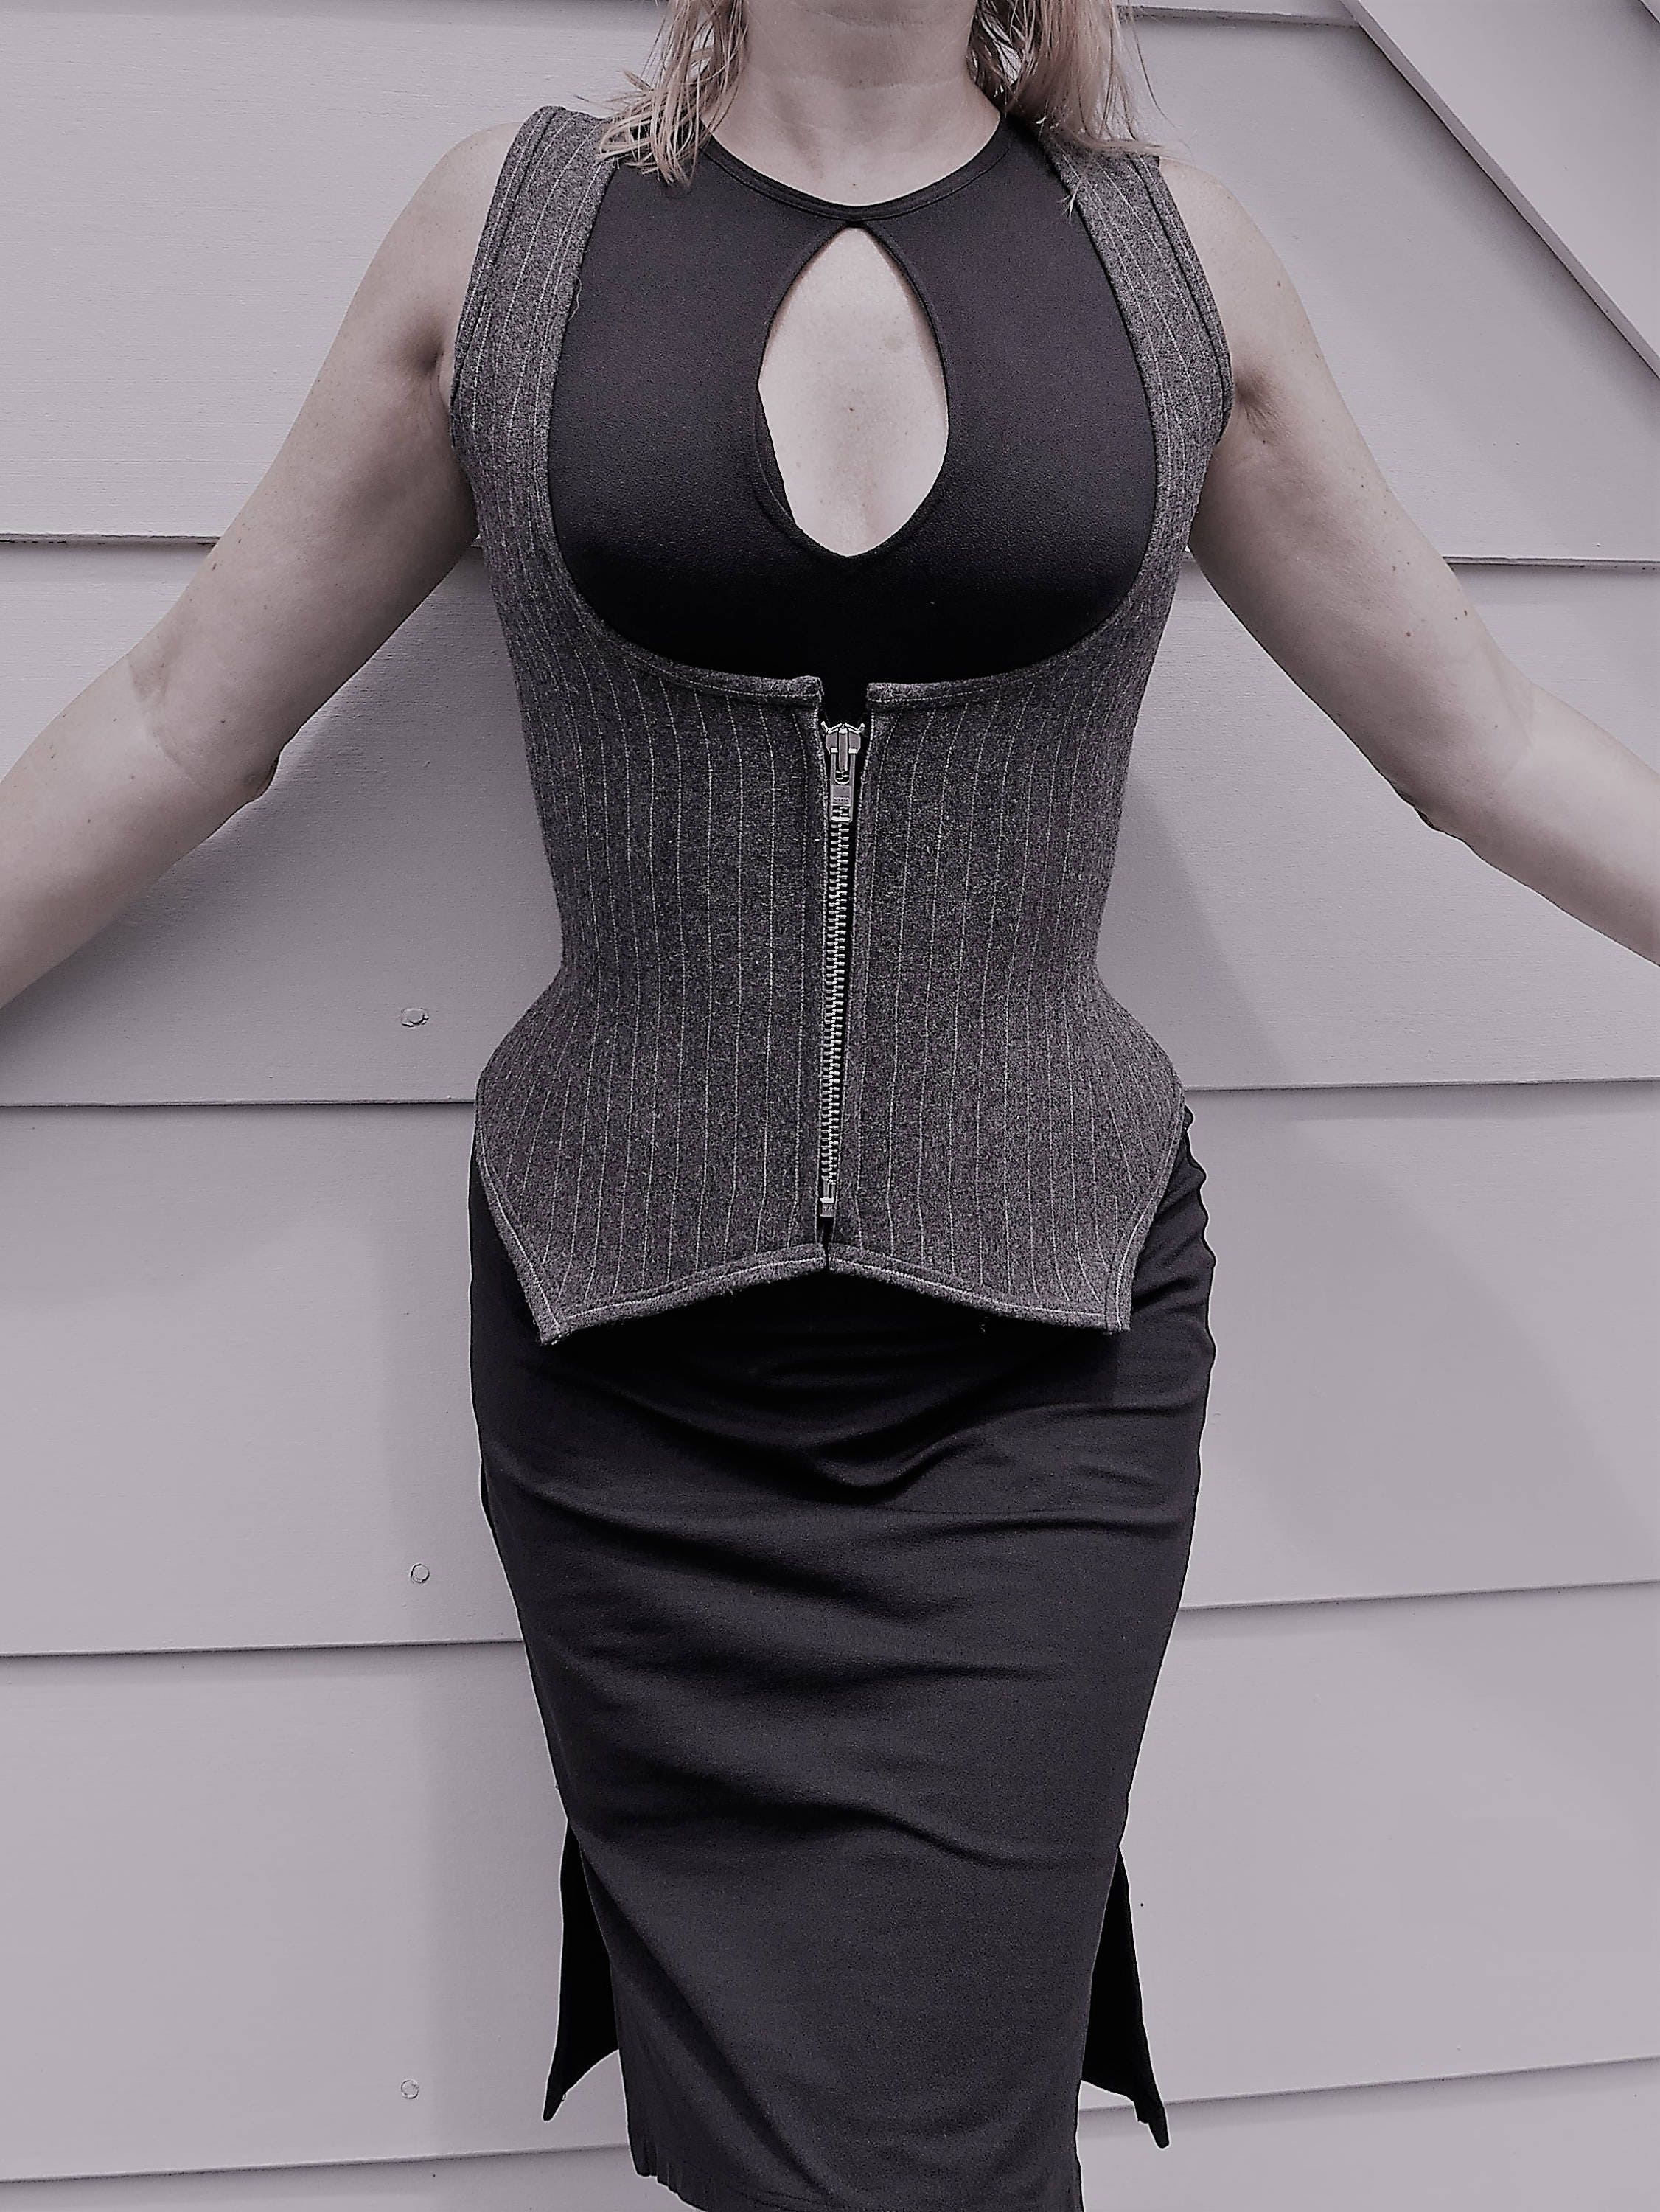 Corset Pattern The waistcoat-inspired under-bust corset in sizes